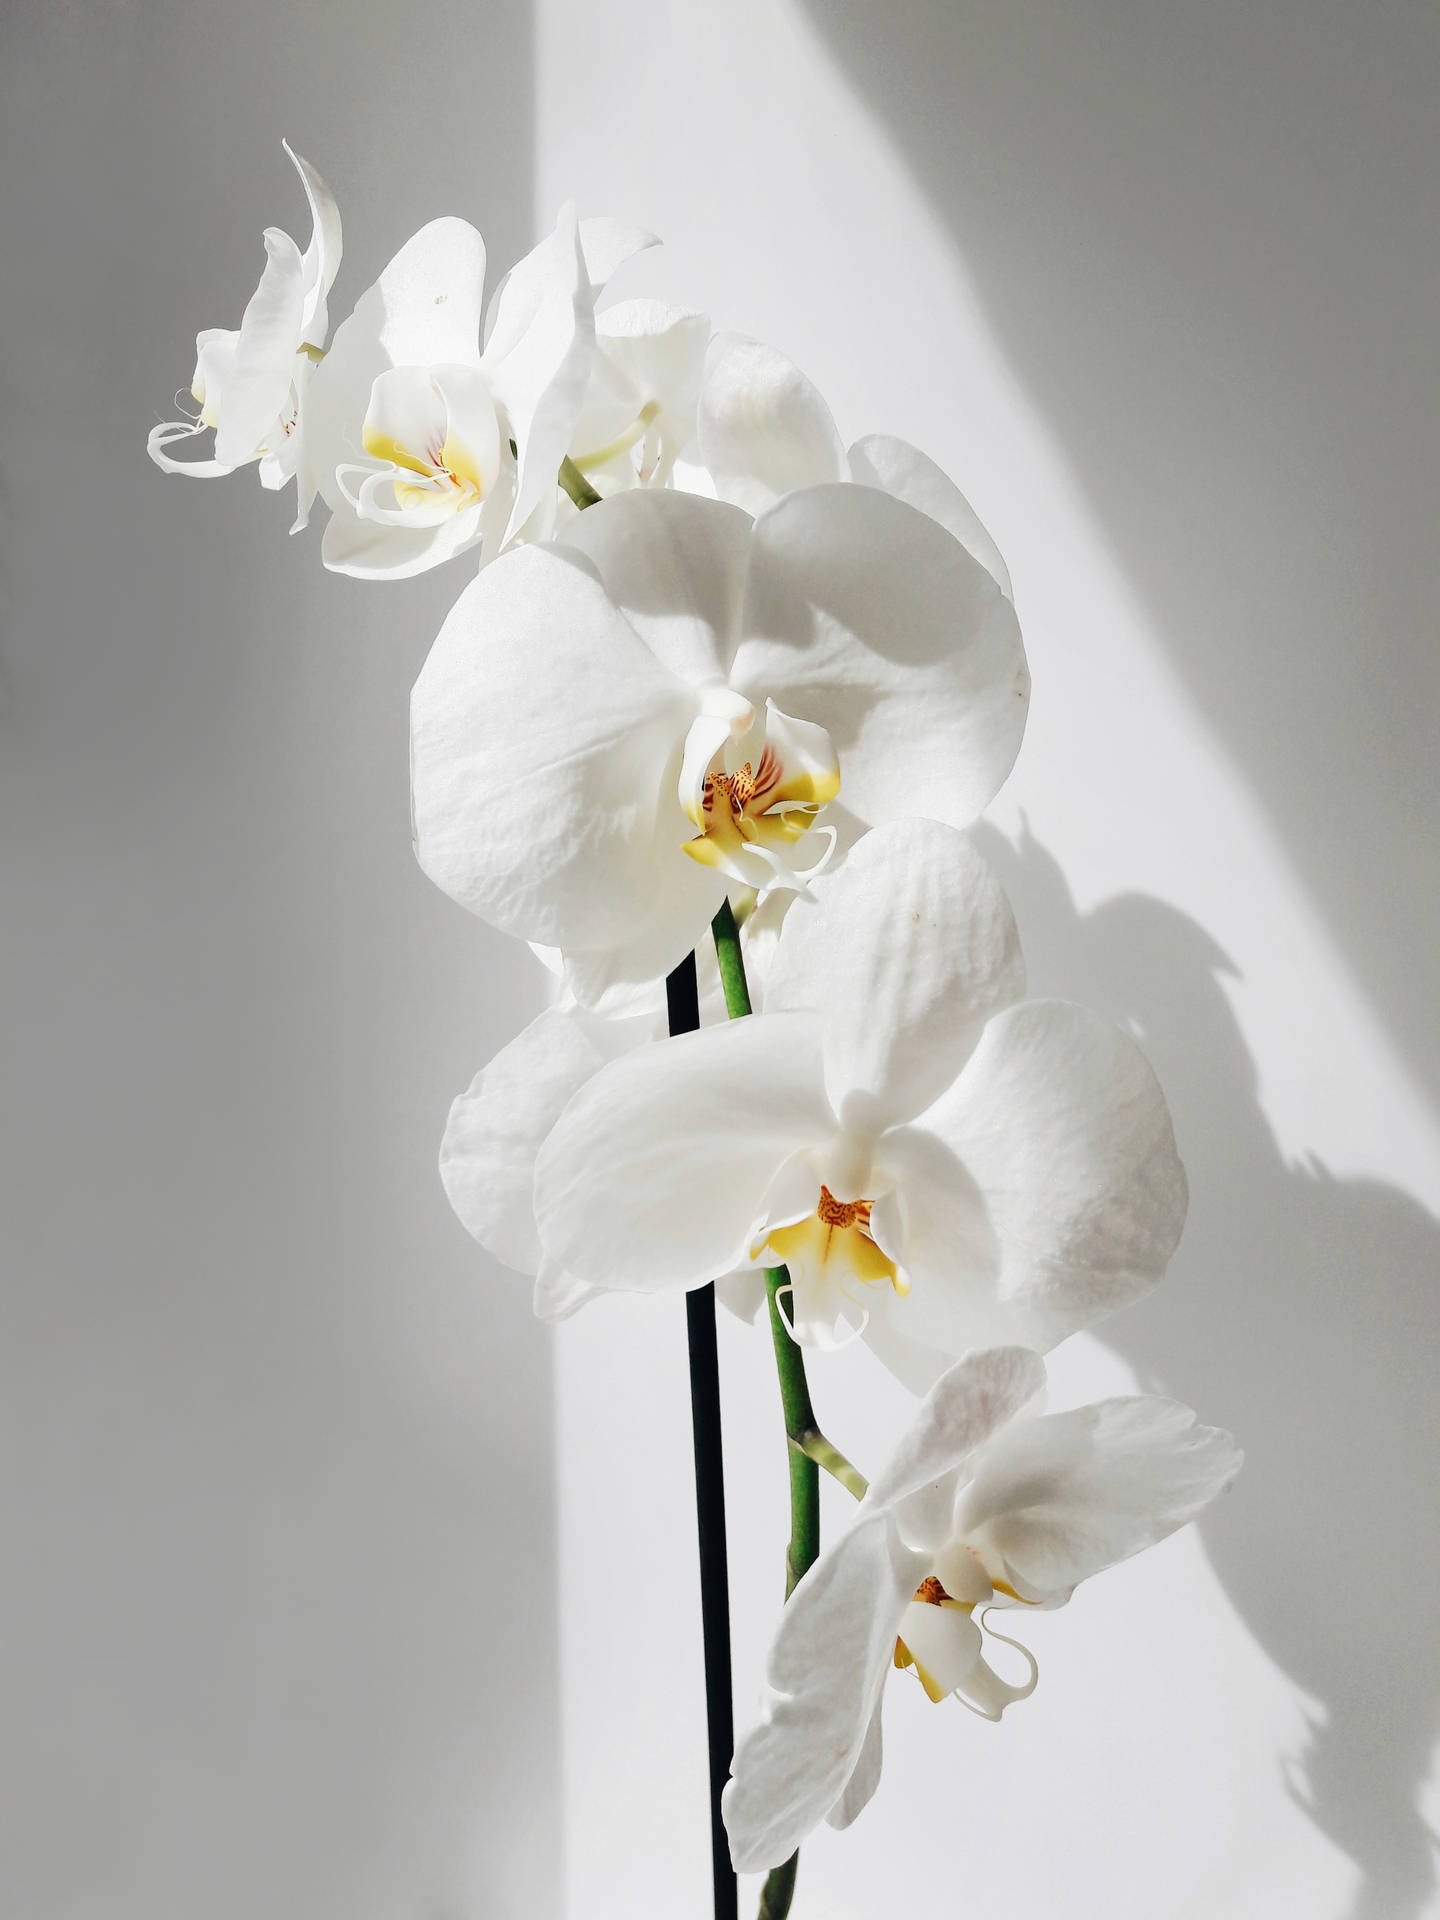 Orchids Wallpaper Images